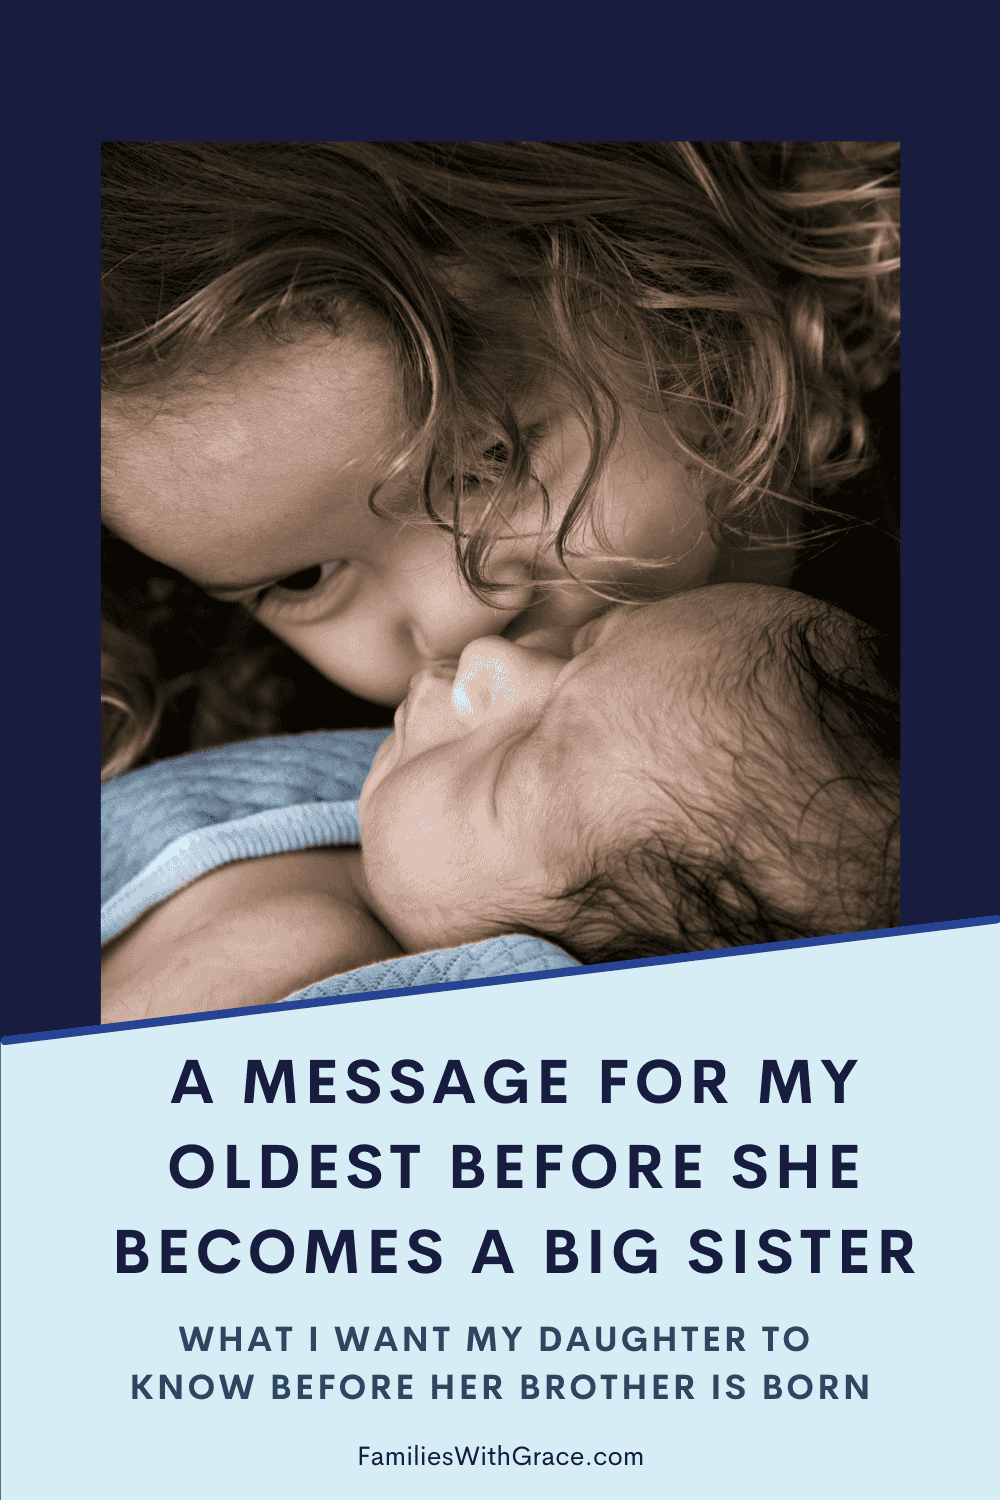 A message for my oldest before she becomes a big sister